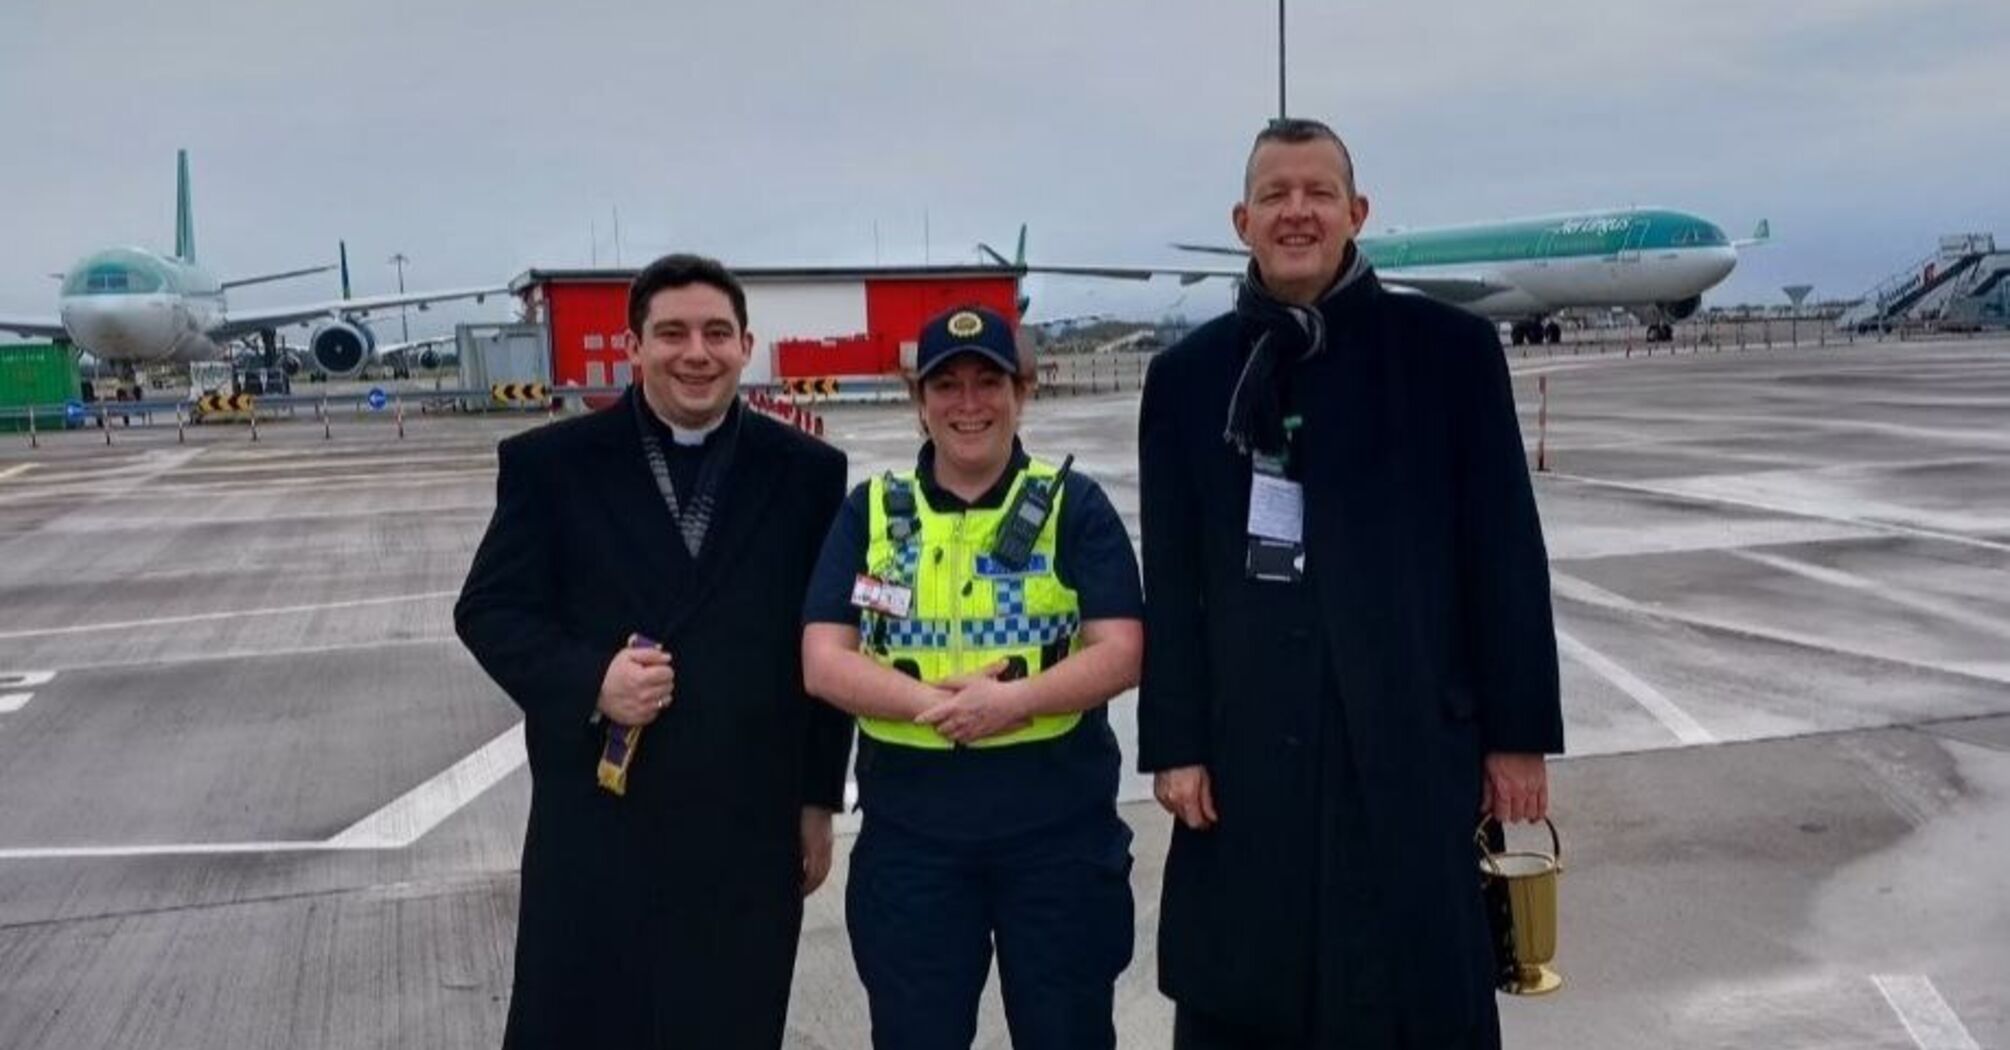 Priest blesses airplanes at Dublin airport for Christmas